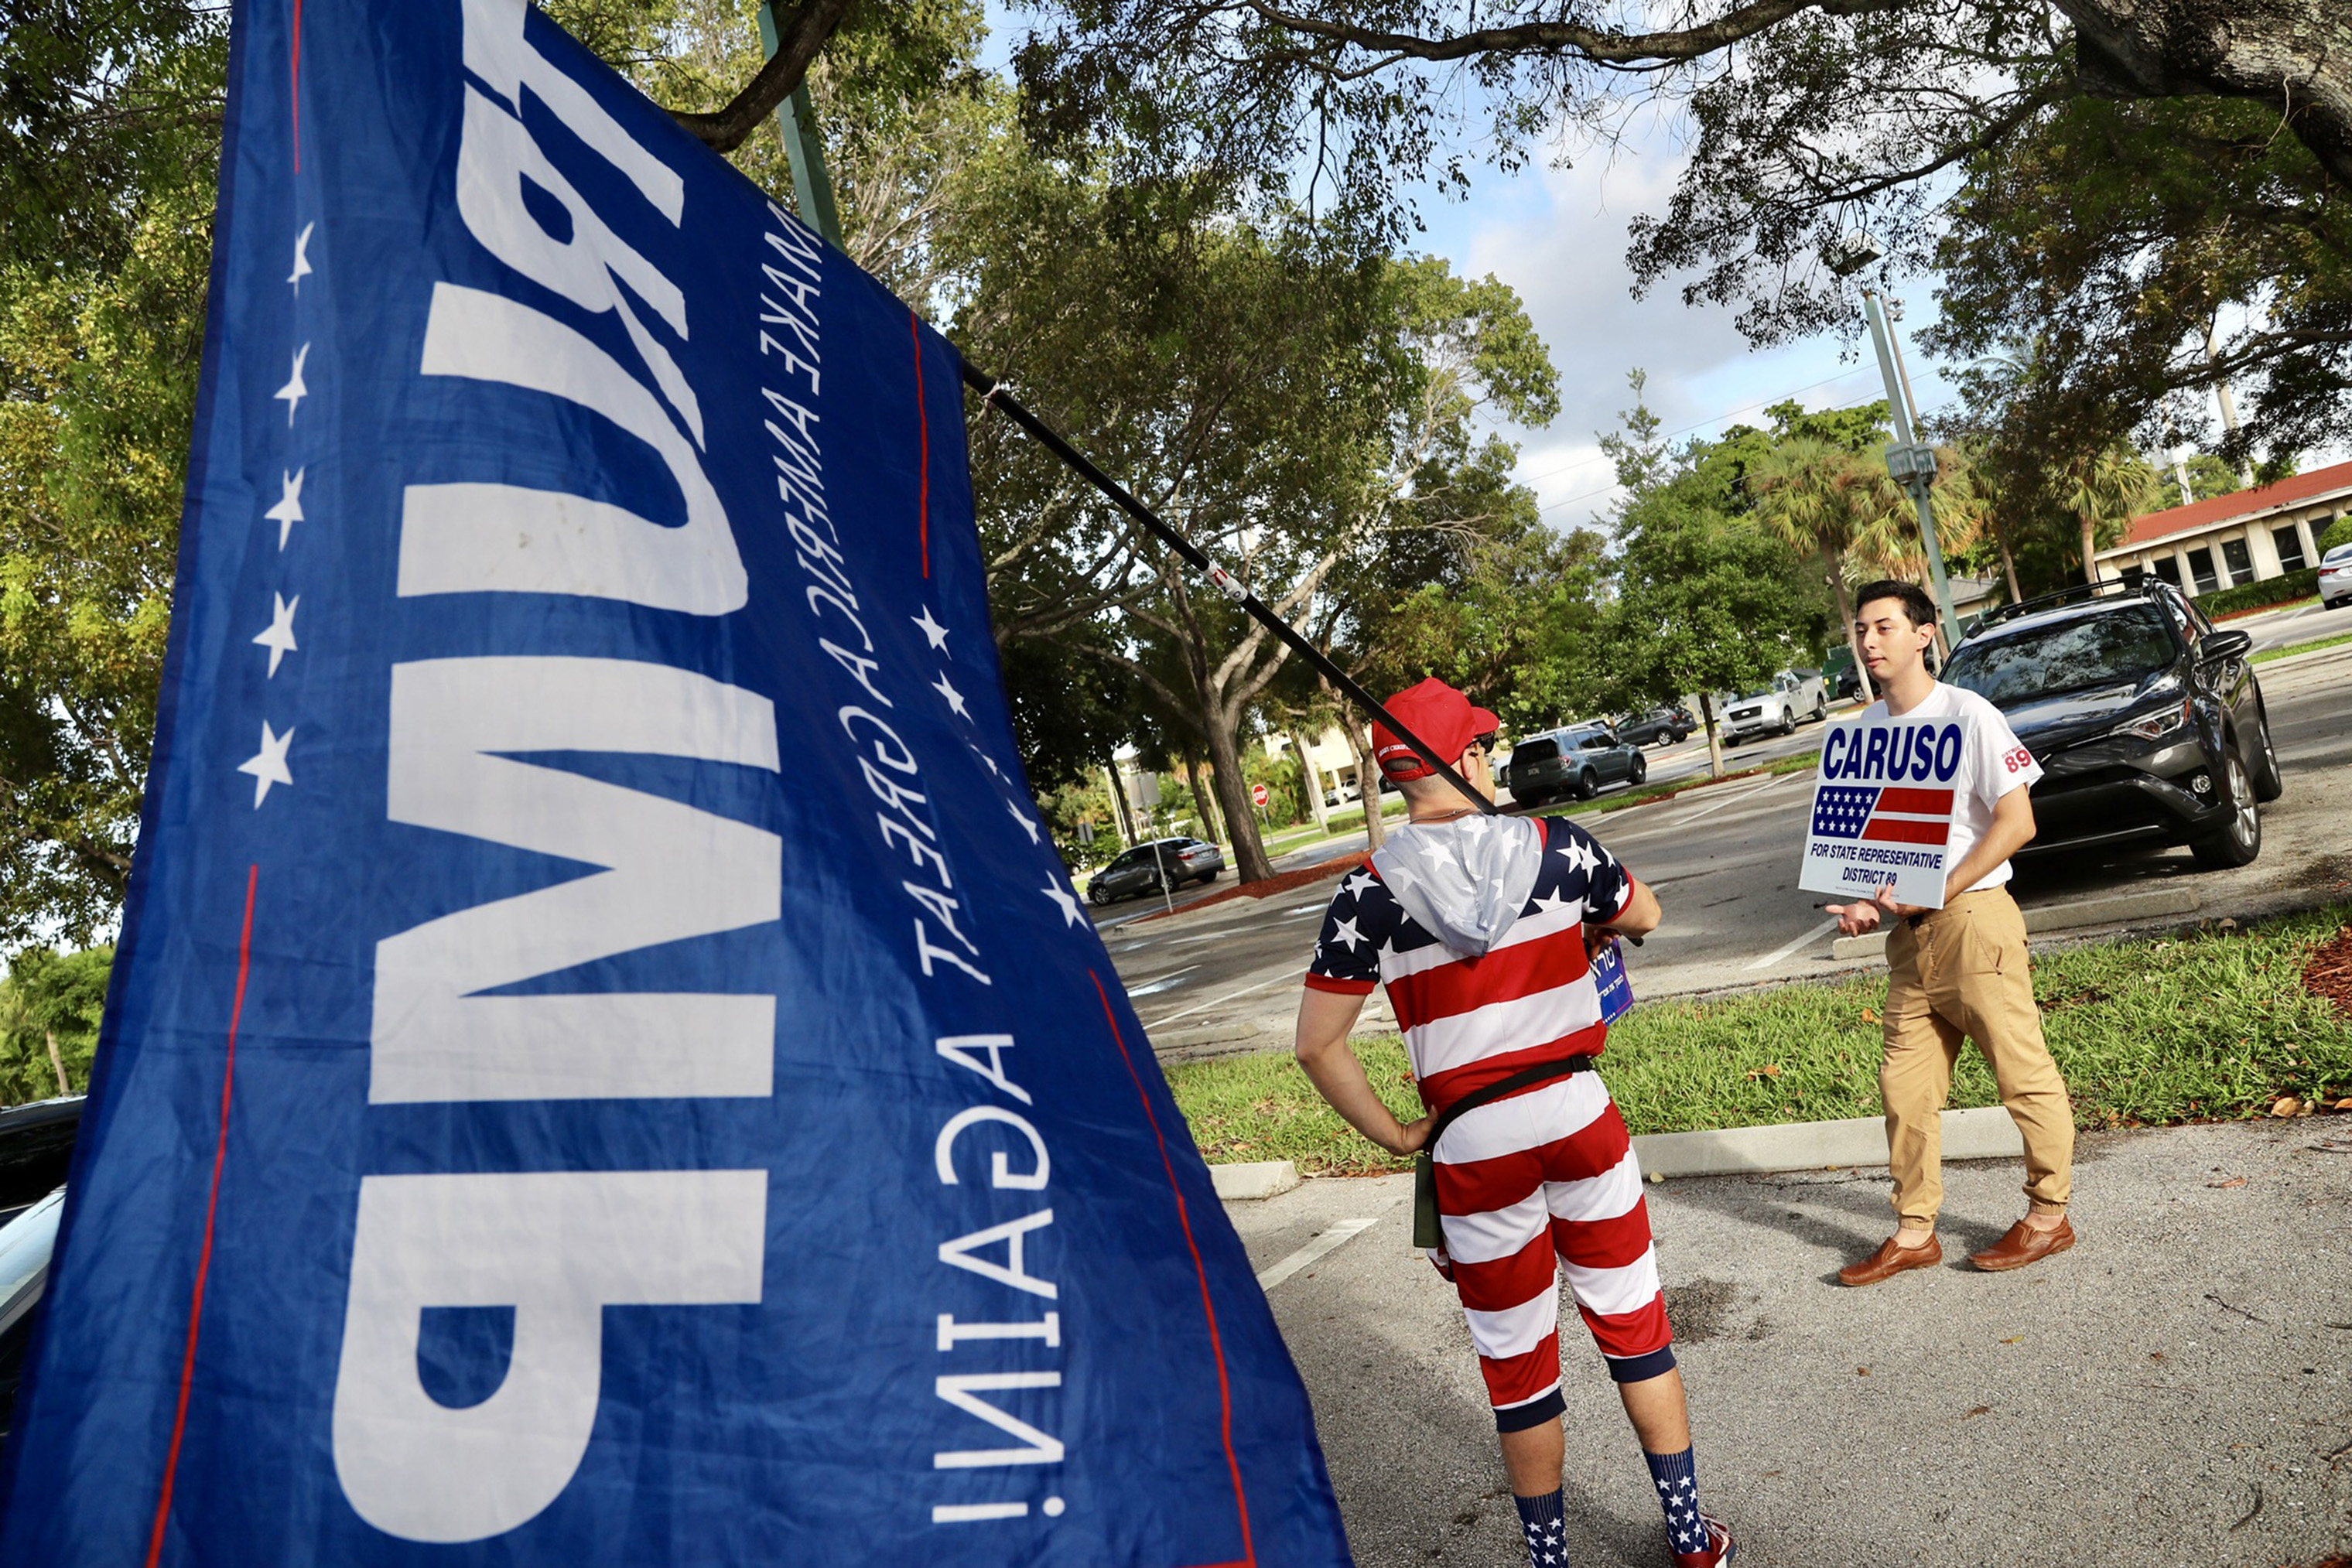 Mike Caruso campaign employee Isaac Rheinbolt, chats with a Trump supporter, who did not want to be identified, in the parking lot of the Boca Raton Community Center on Election Day. (Amy Beth Bennett—Sun Sentinel/TNS/Getty Images)